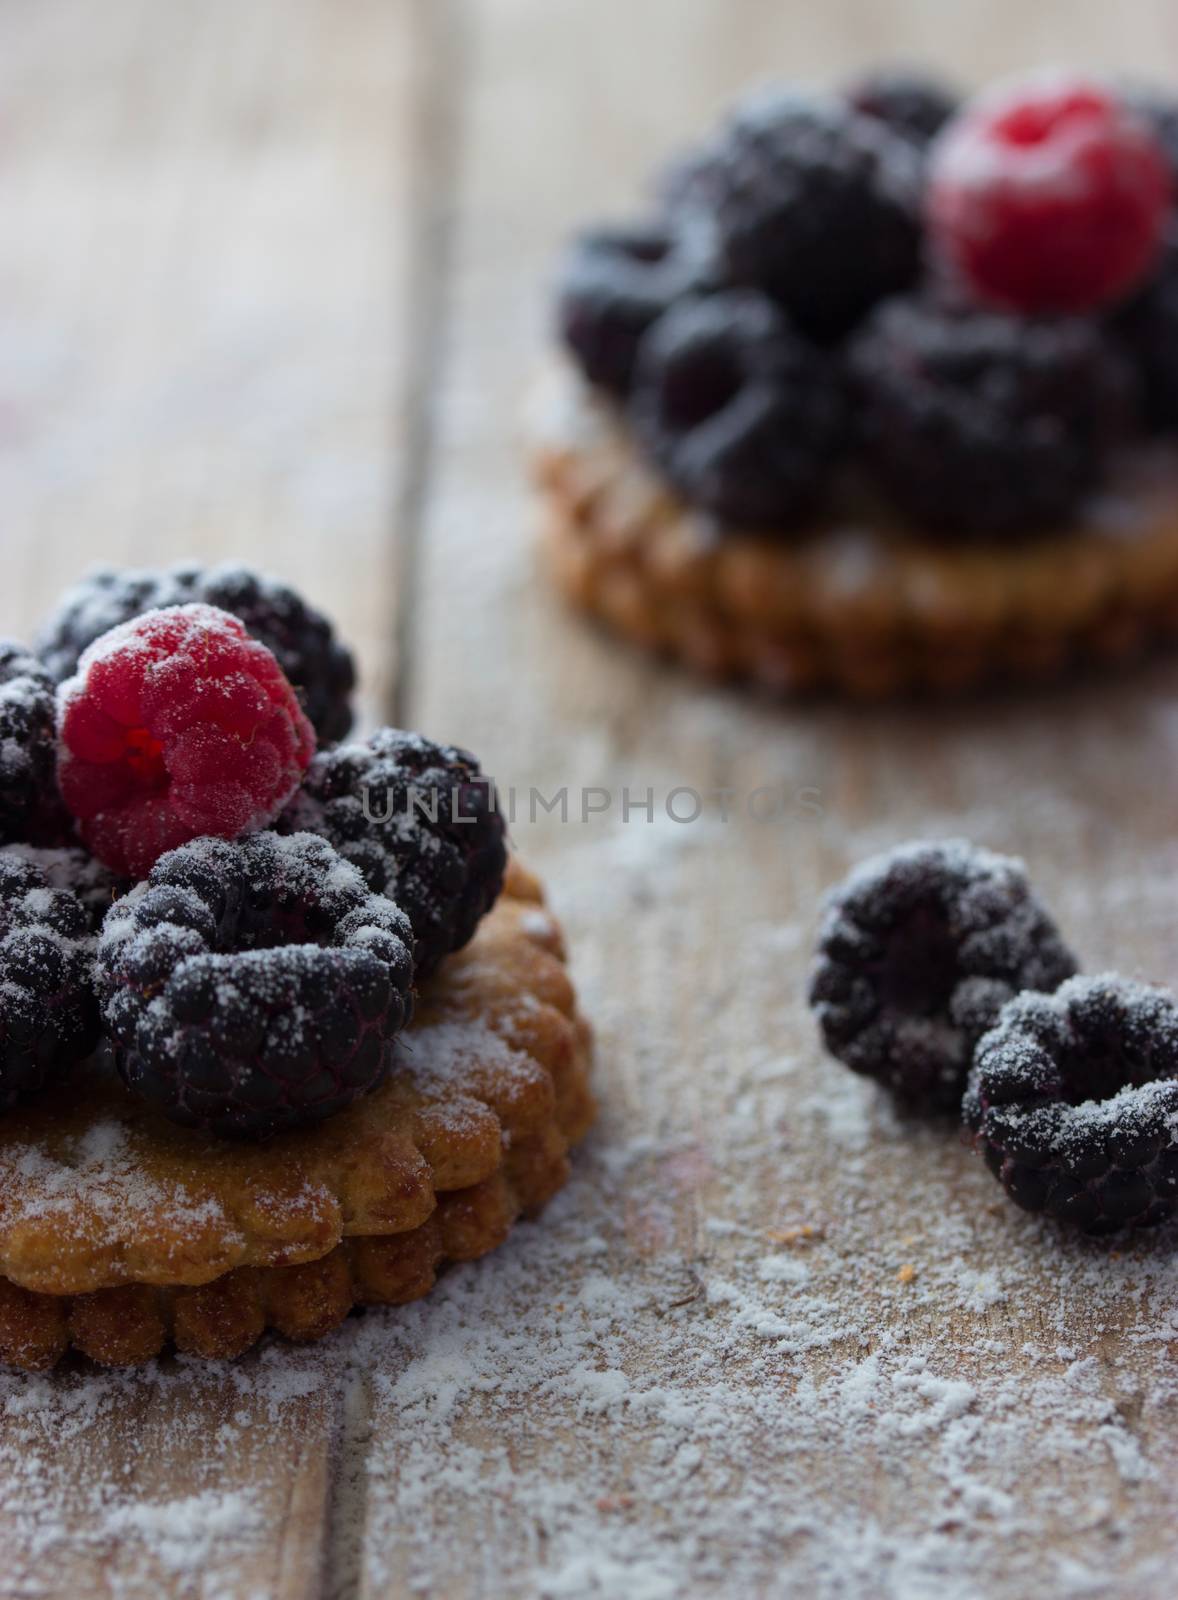 Fresh berry tartlet or cake filled with raspberry blackberry icing